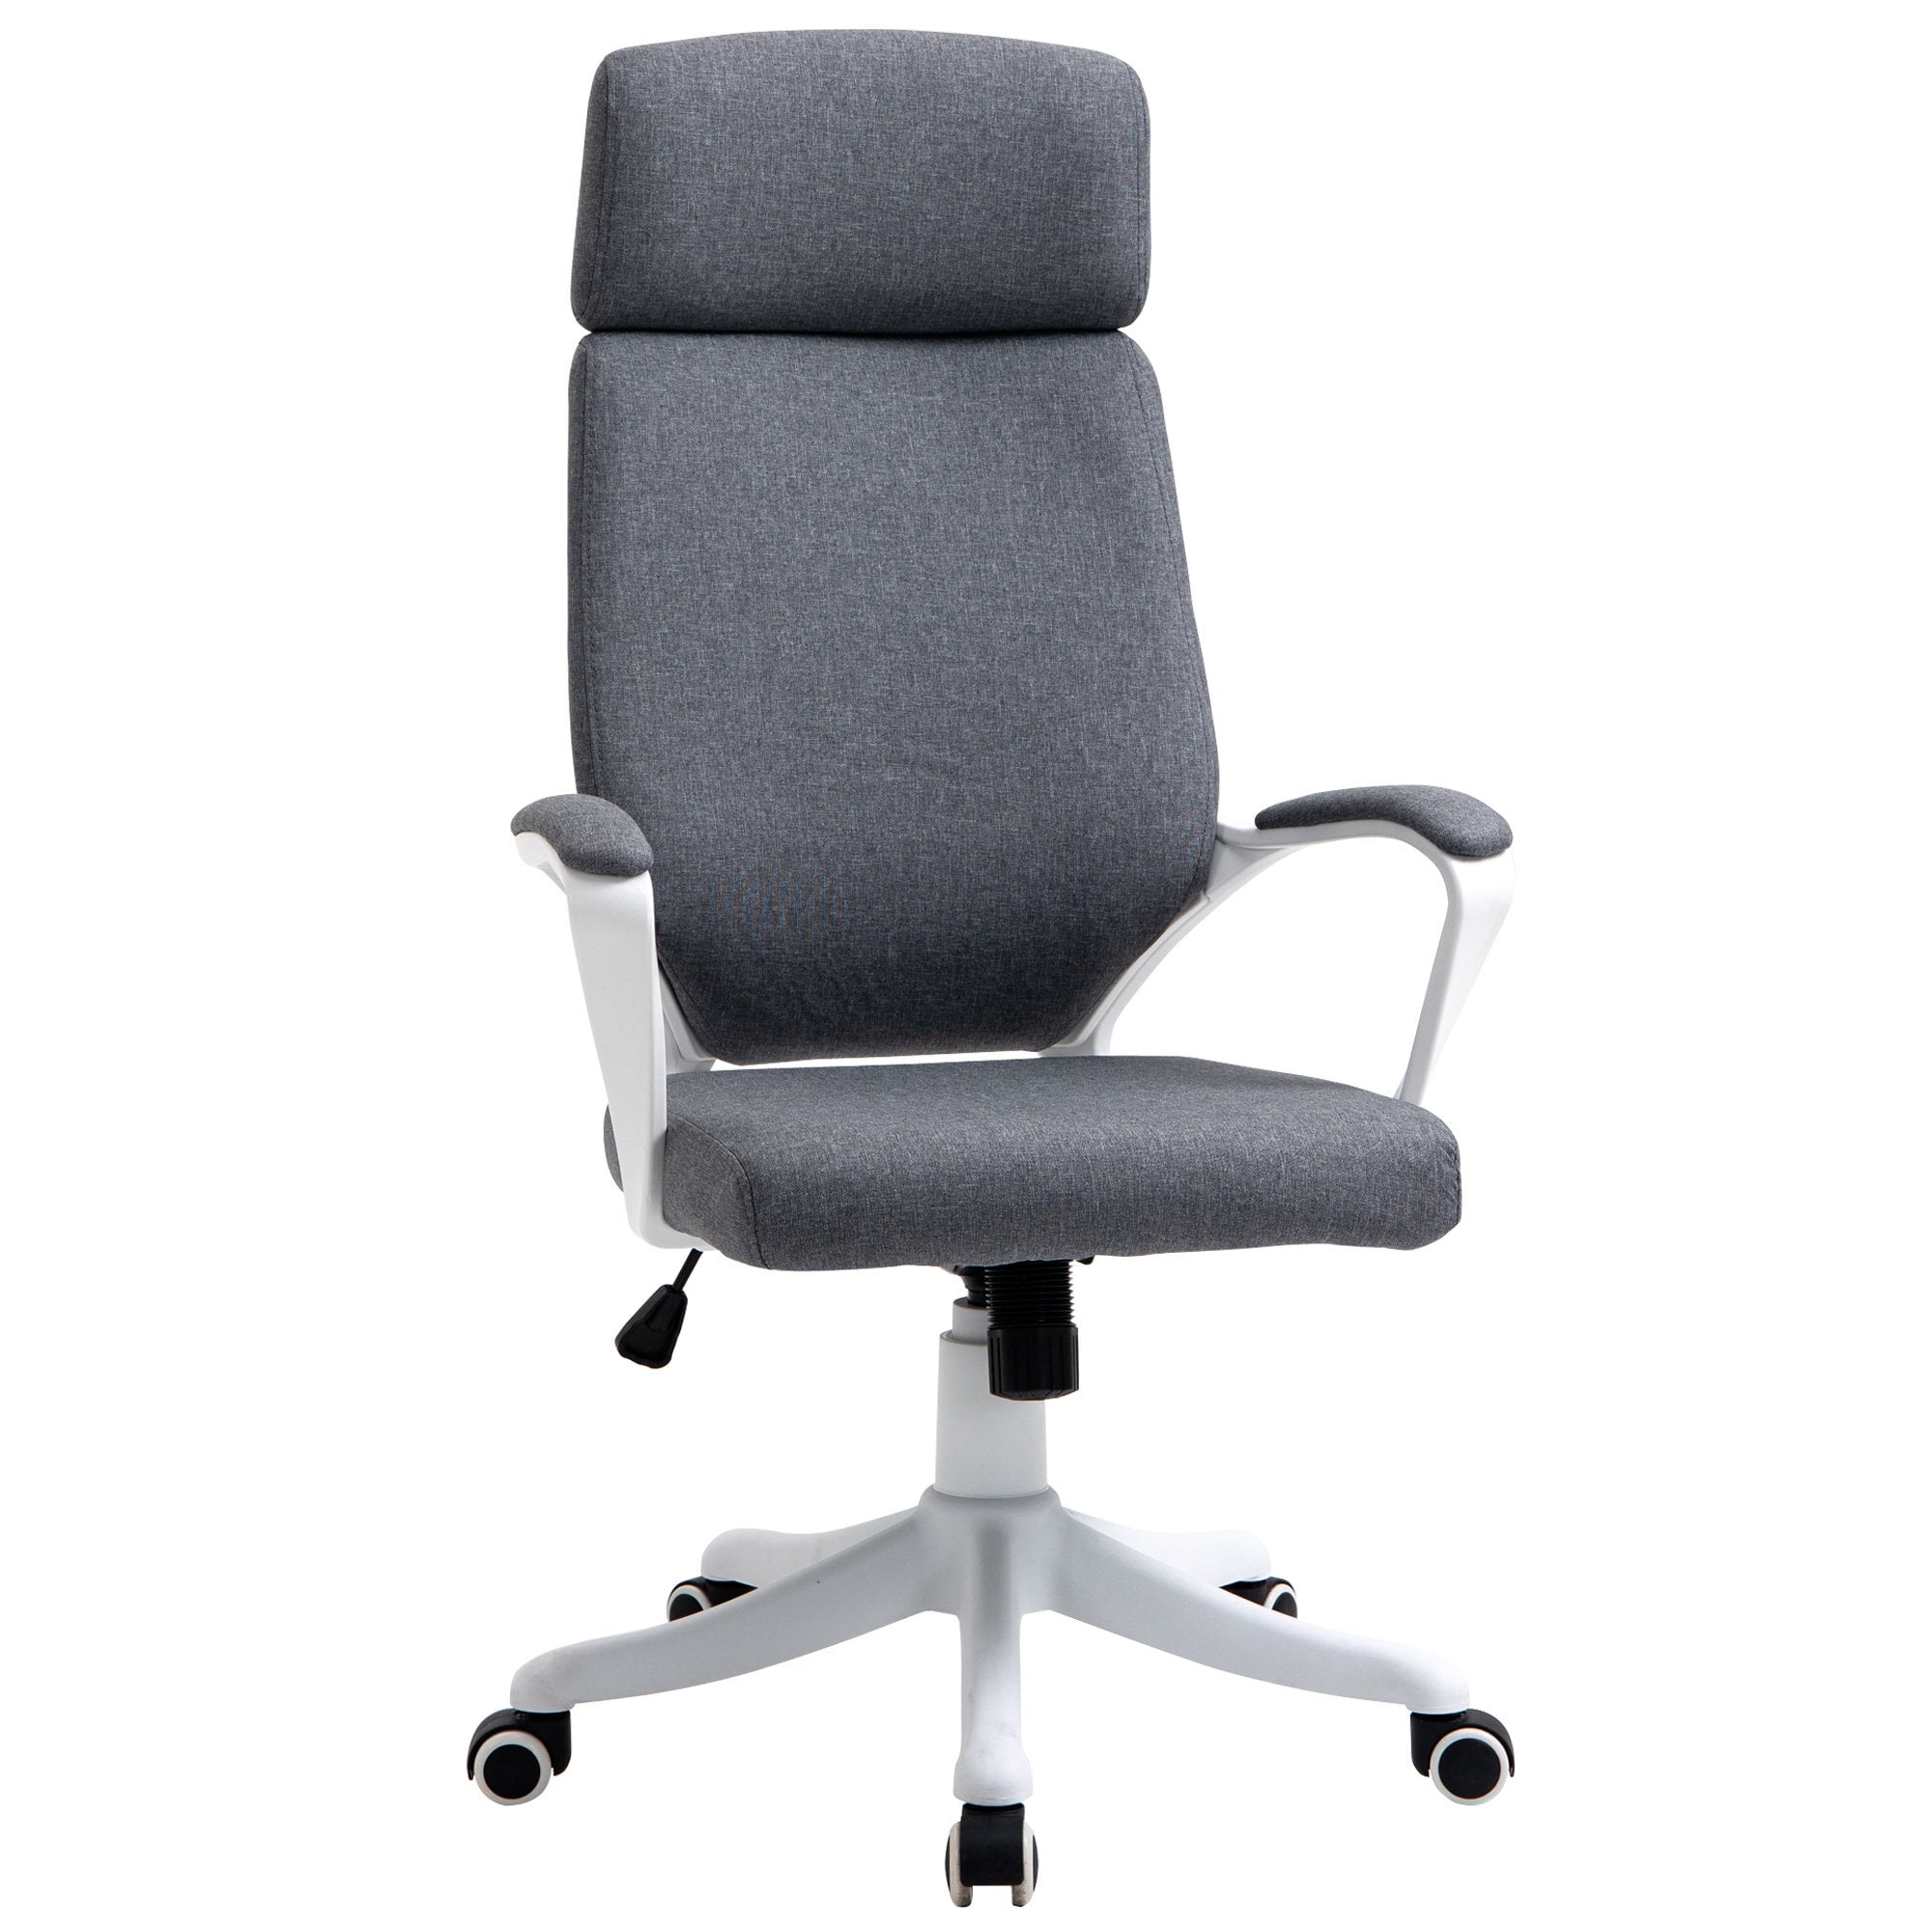 Vinsetto Office Chair High Back 360-| Swivel Task Chair Ergonomic Desk Chair with Lumbar Back Support - Adjustable Height - CARTER  | TJ Hughes